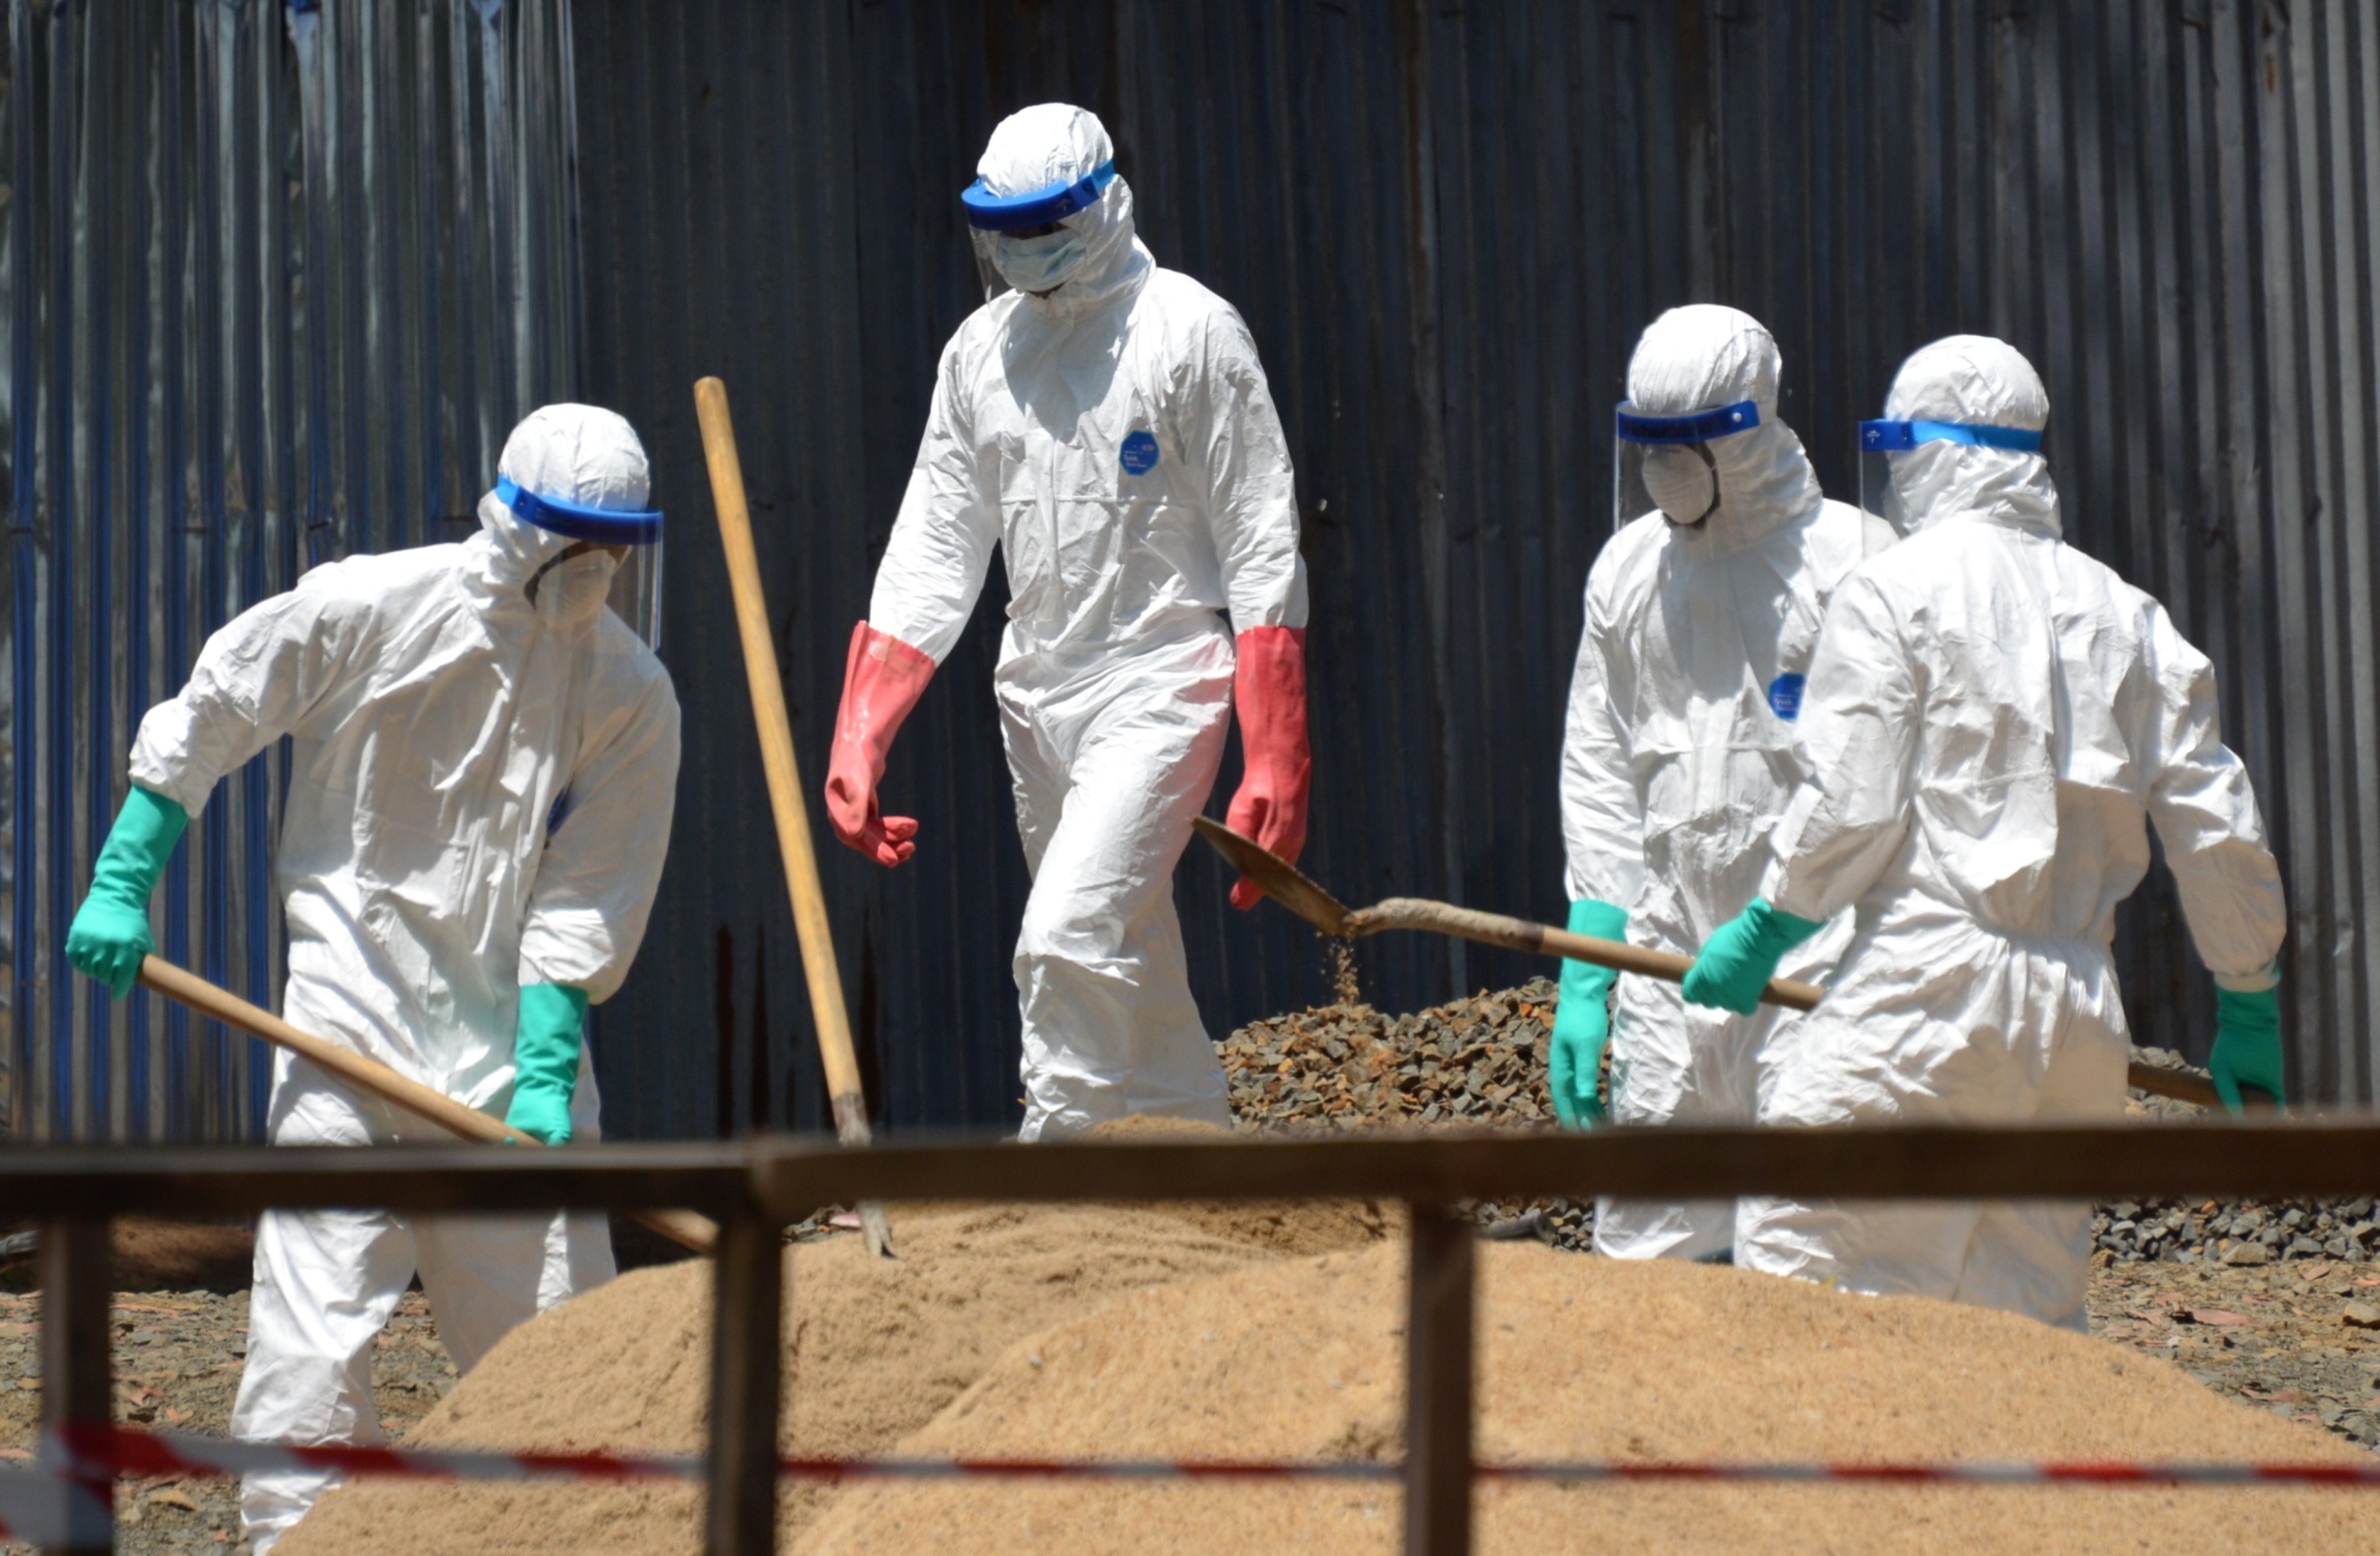 Health workers from the Liberian Red Cross wear protective gear as they shovel sand which will be used to absorb fluids emitted from the bodies of Ebola victims in front of the ELWA 2 Ebola management center in Monrovia on October 23, 2014.